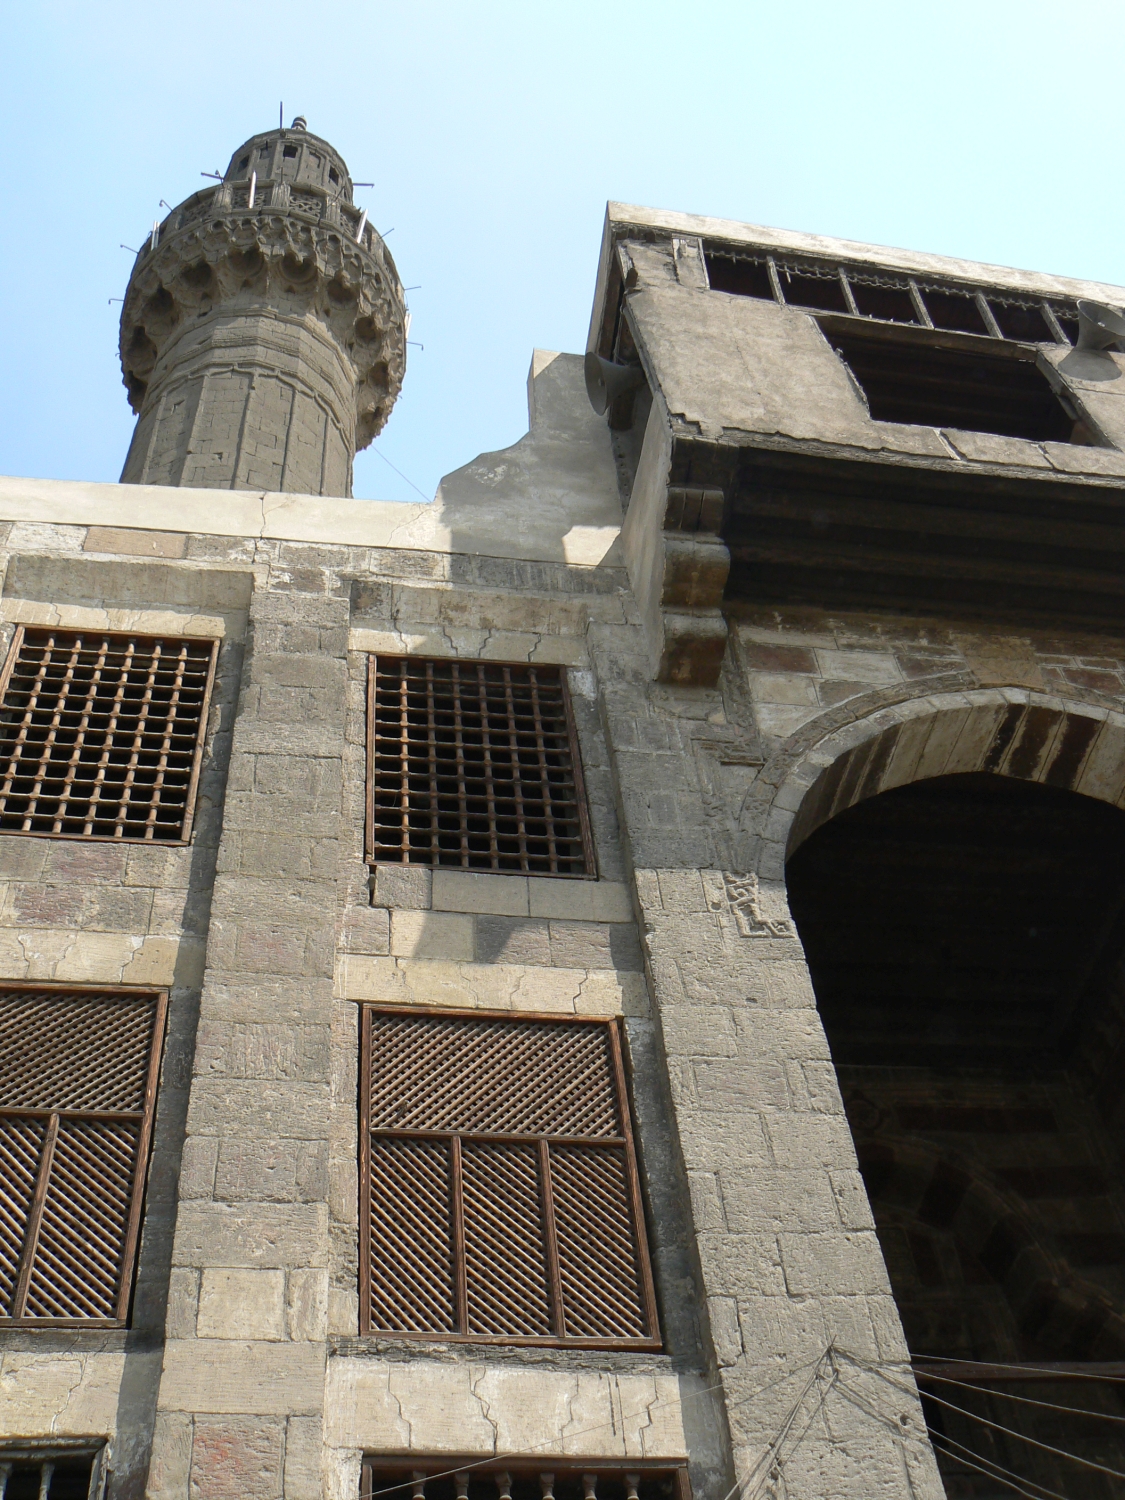 Upwards view of the front facade to the left of the main portal, with partial view of the minaret